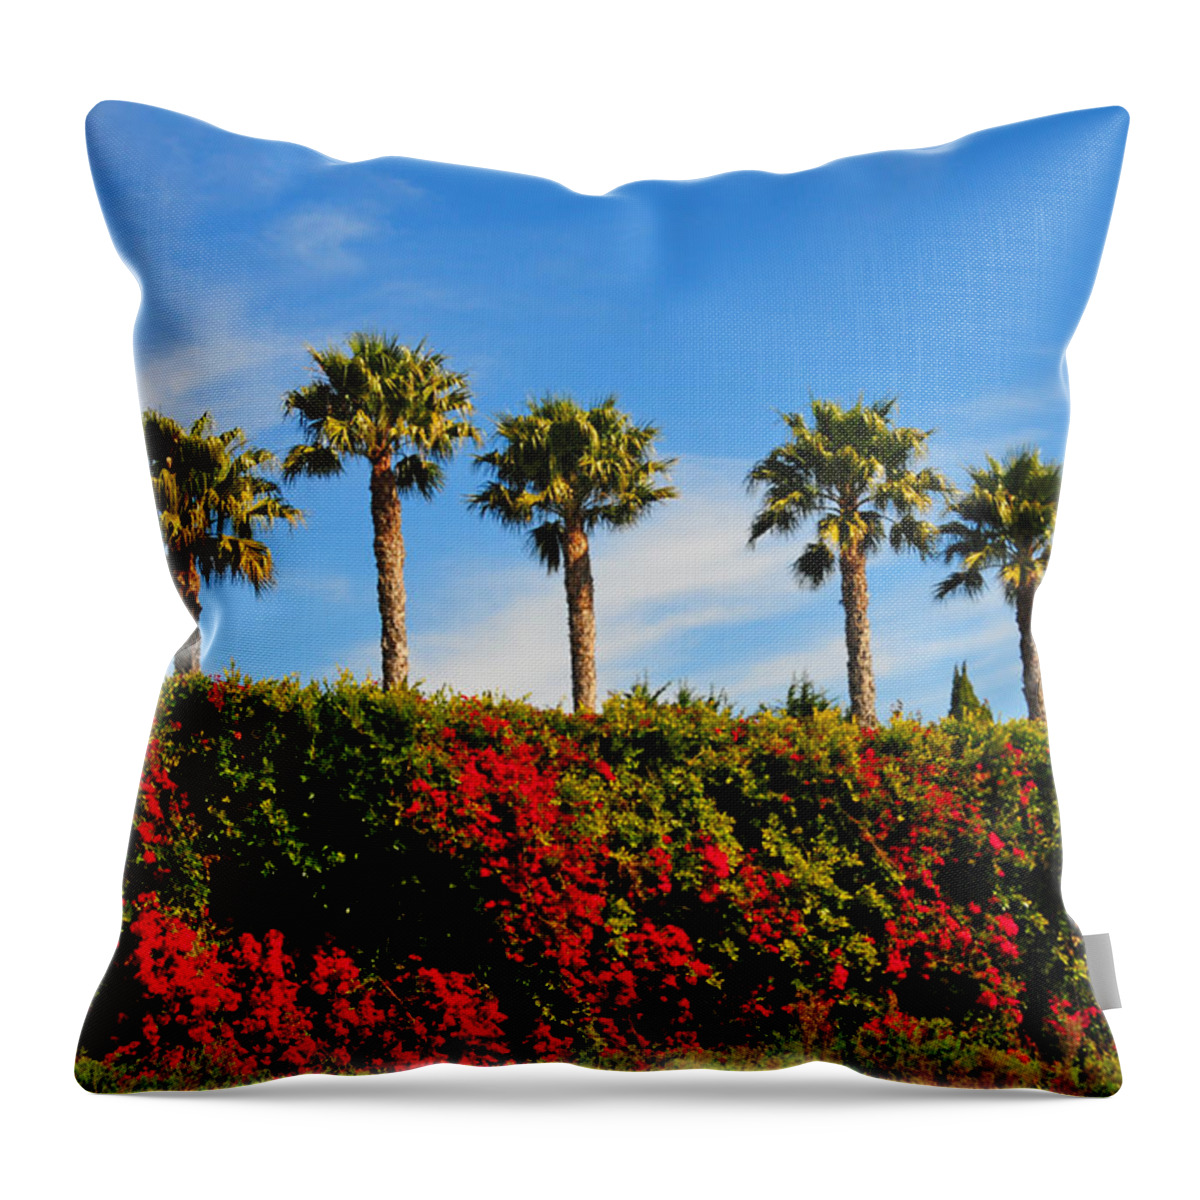 Pt Dume Throw Pillow featuring the photograph Pt. Dume Palms by Lynn Bauer